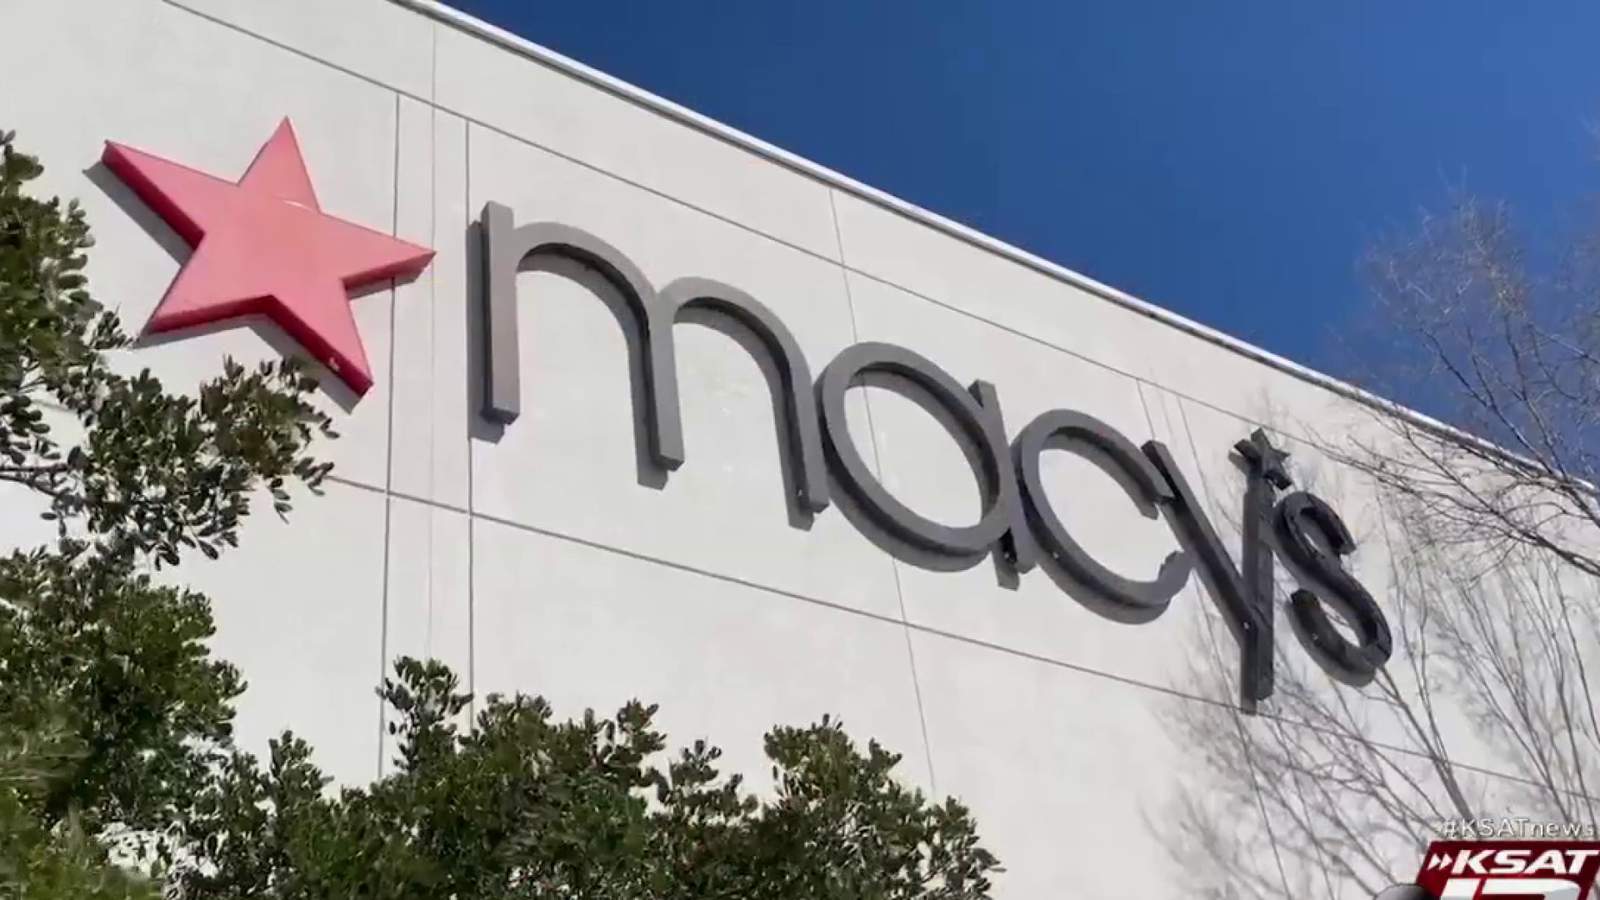 Macy’s exiting 2 San Antonio locations as retailers, malls face challenges